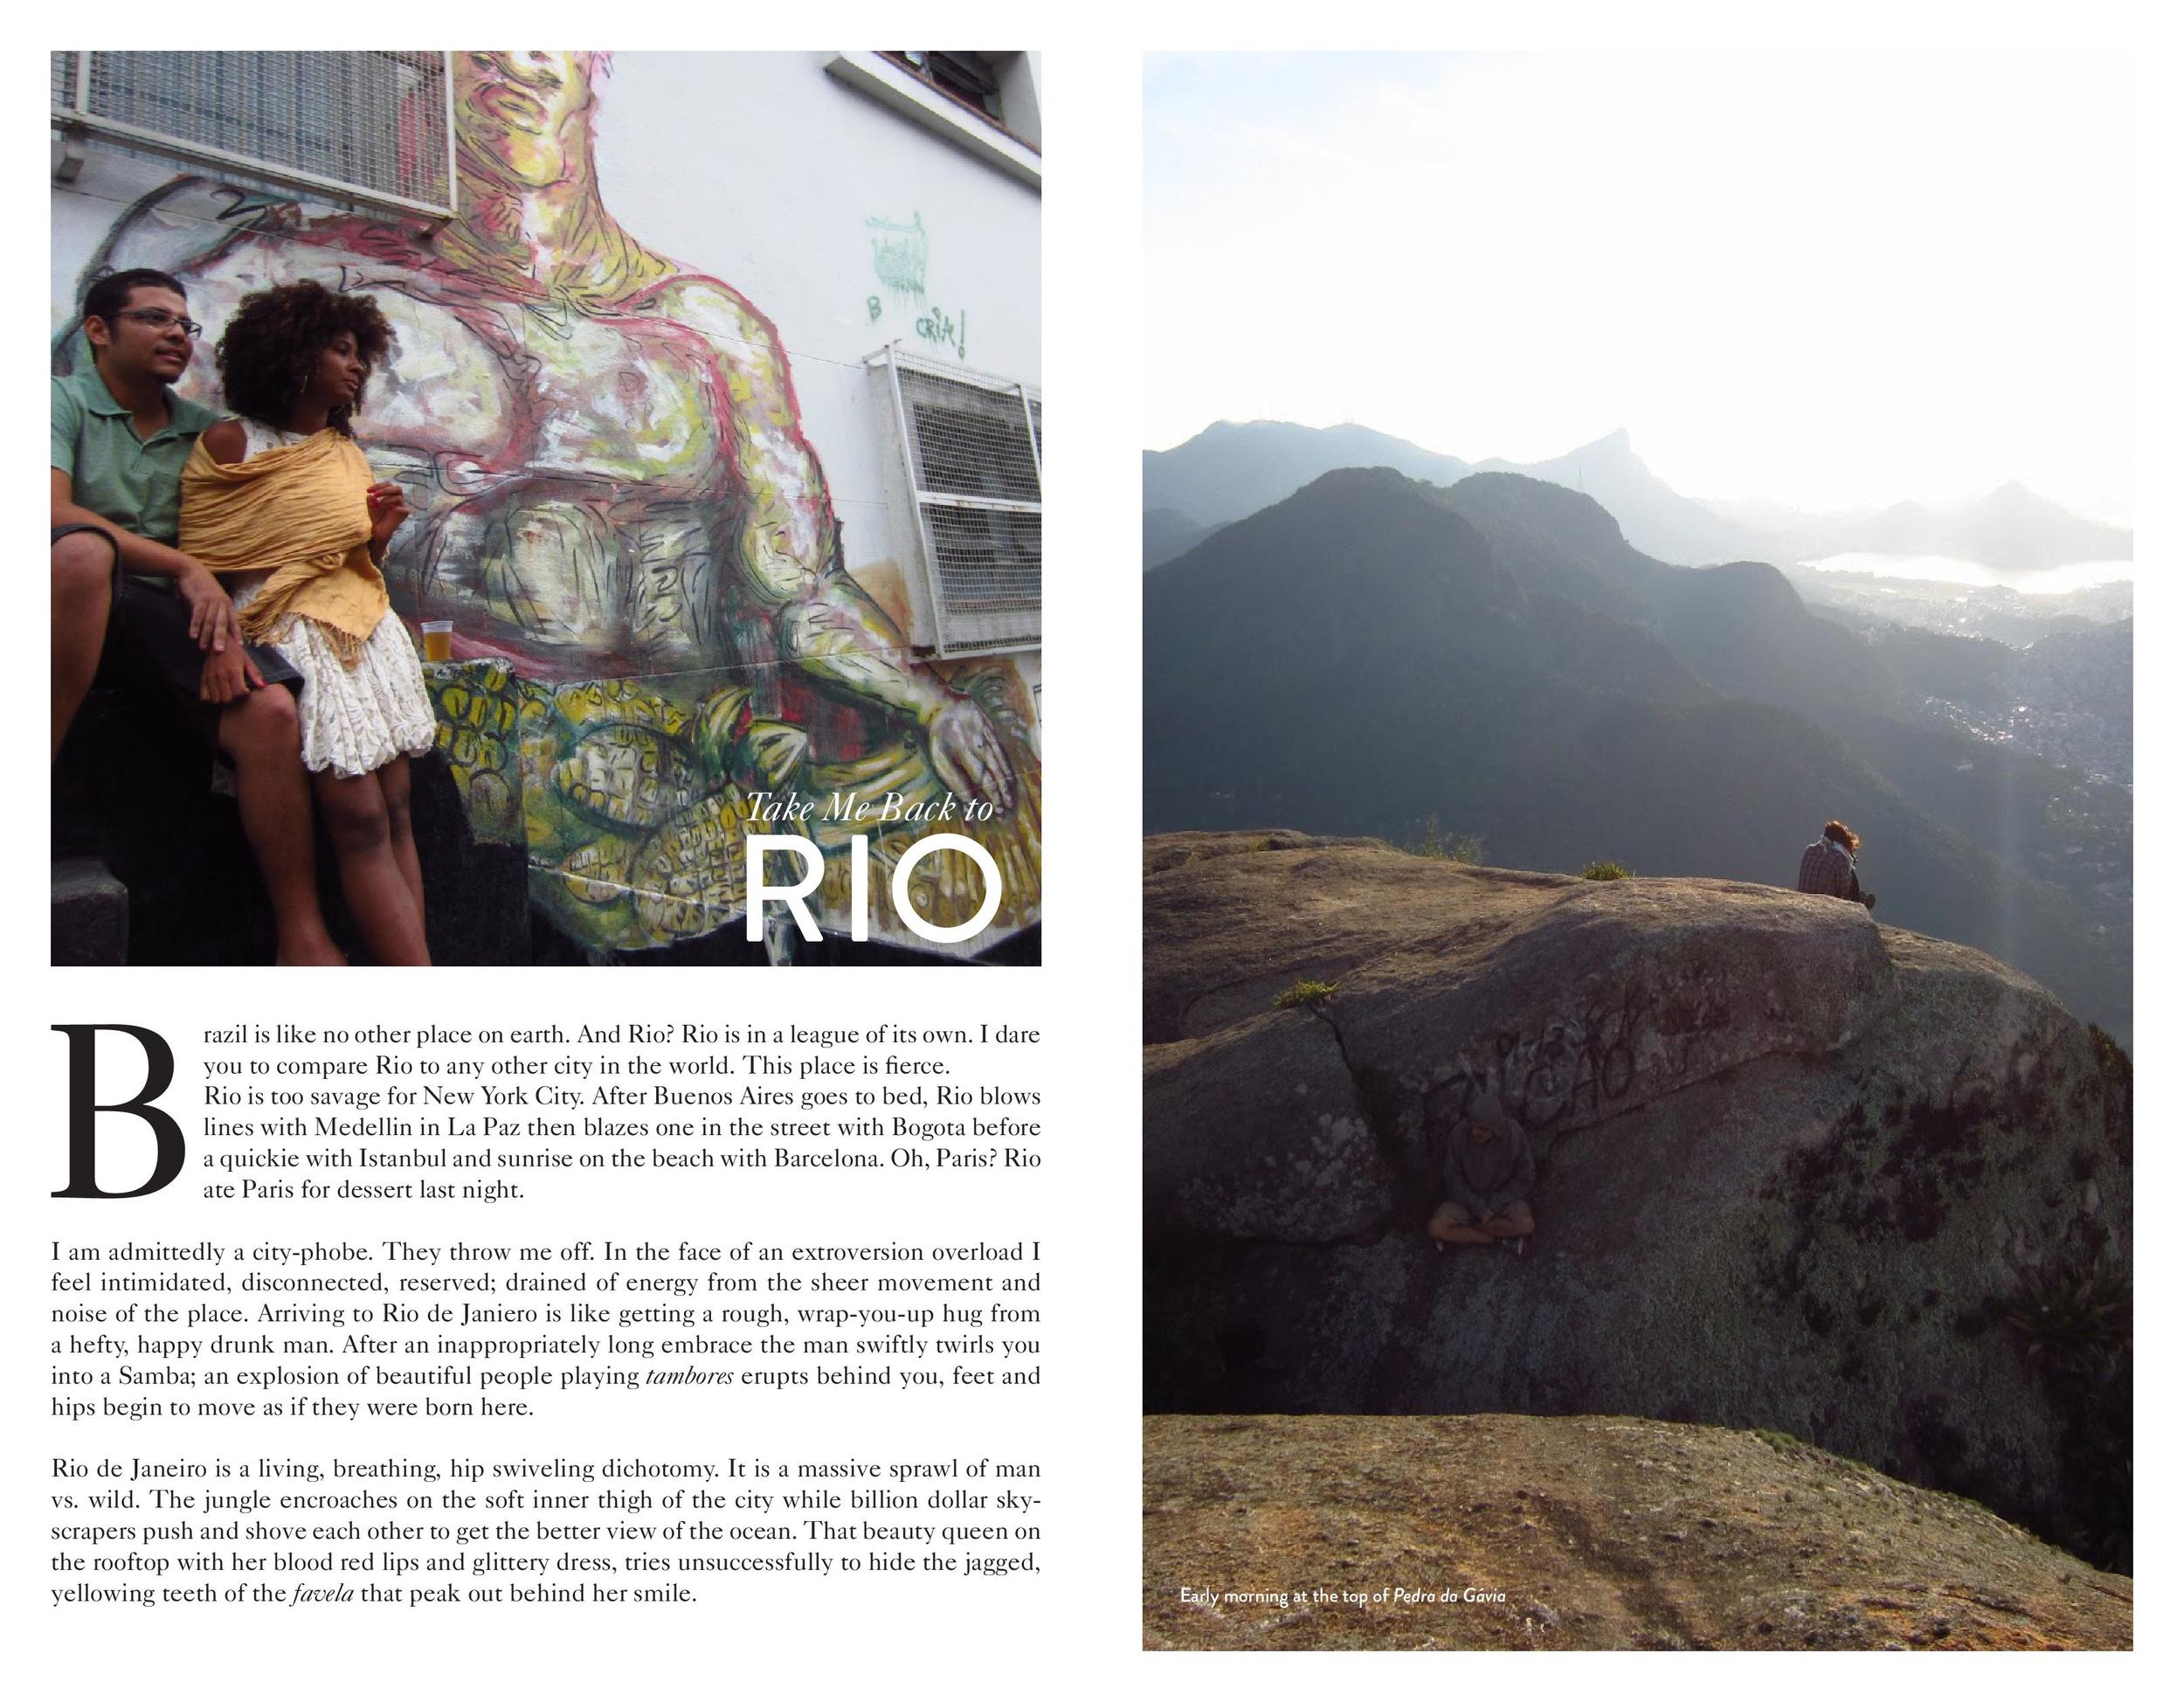 travels_with_a_burro_brazil_02-page-002.jpg